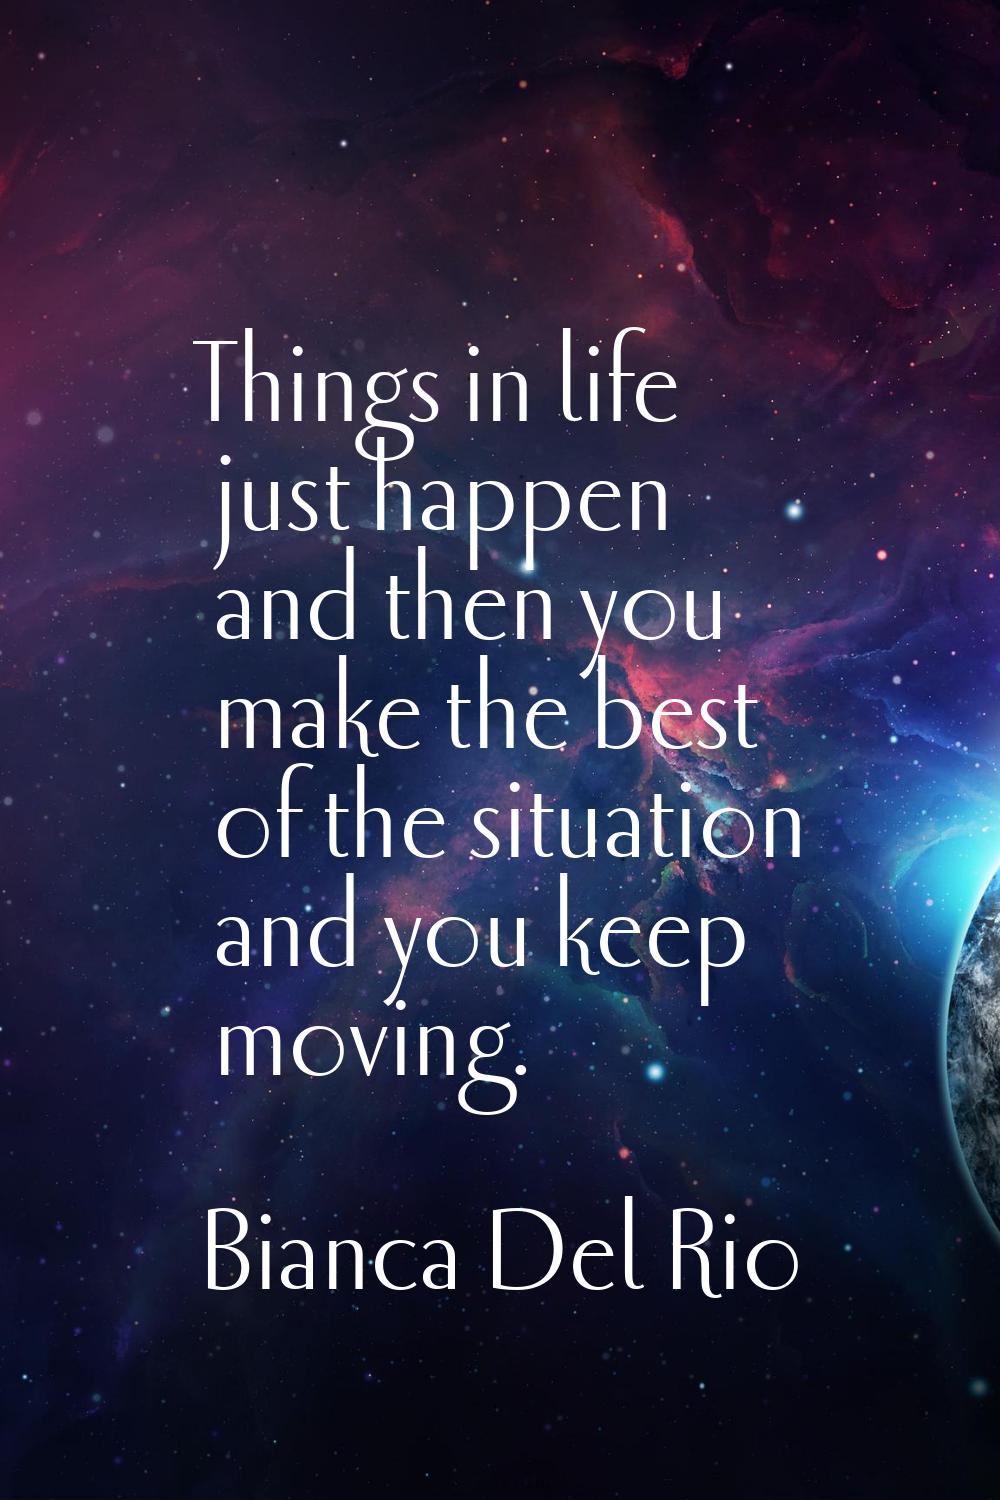 Things in life just happen and then you make the best of the situation and you keep moving.